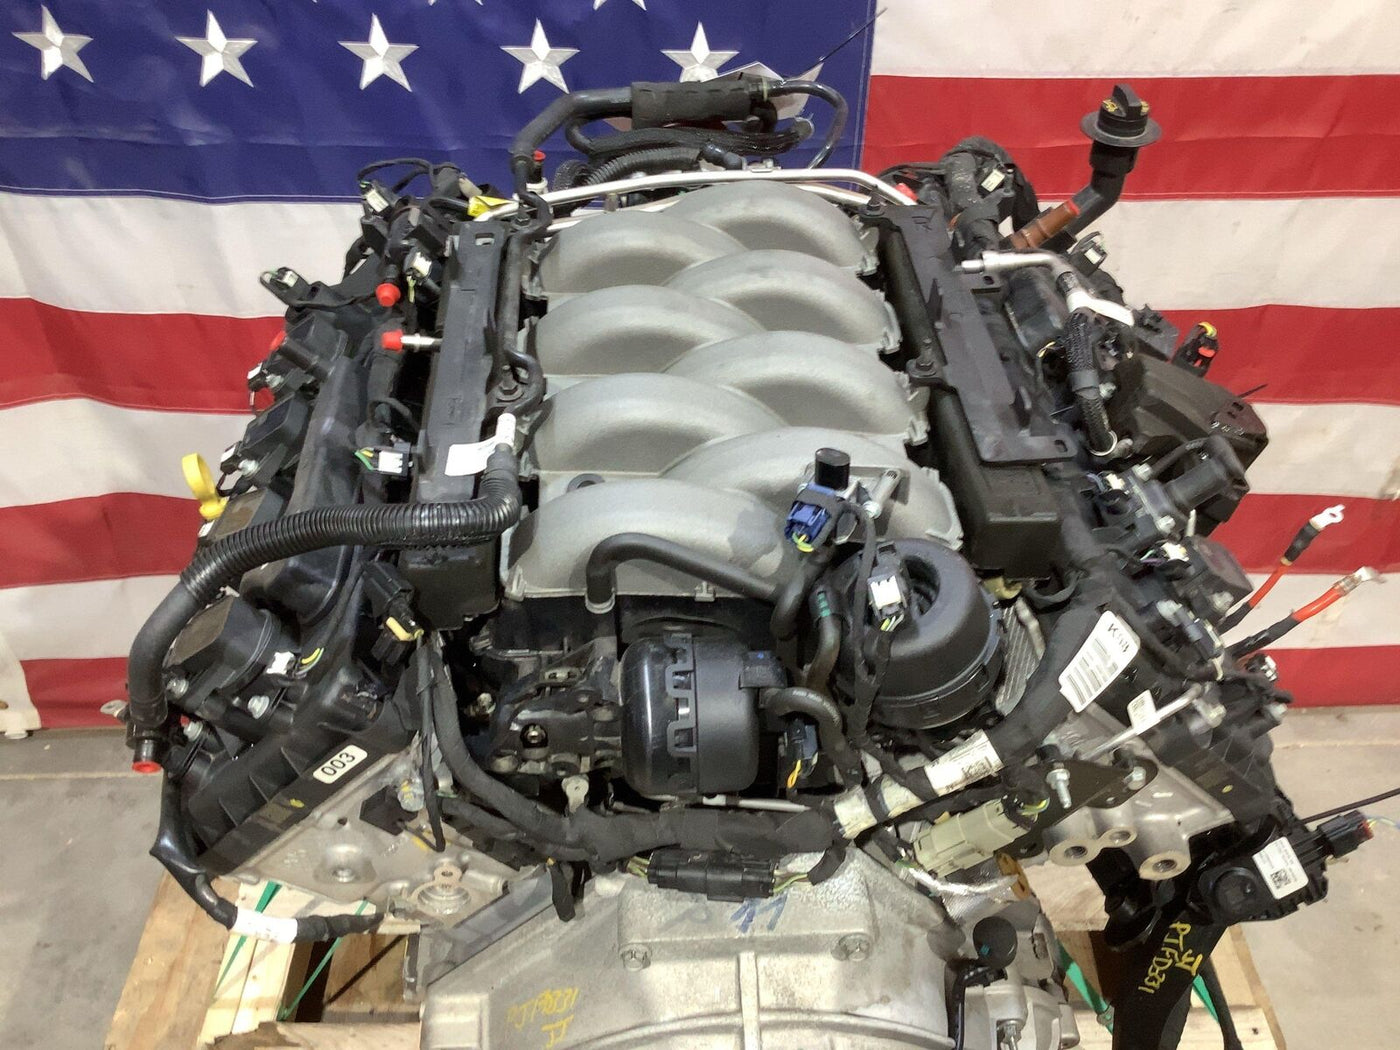 18-22 Mustang GT Coyote 5.0L Engine W/ 6Speed Transmission Dropout Hot Rod Swap